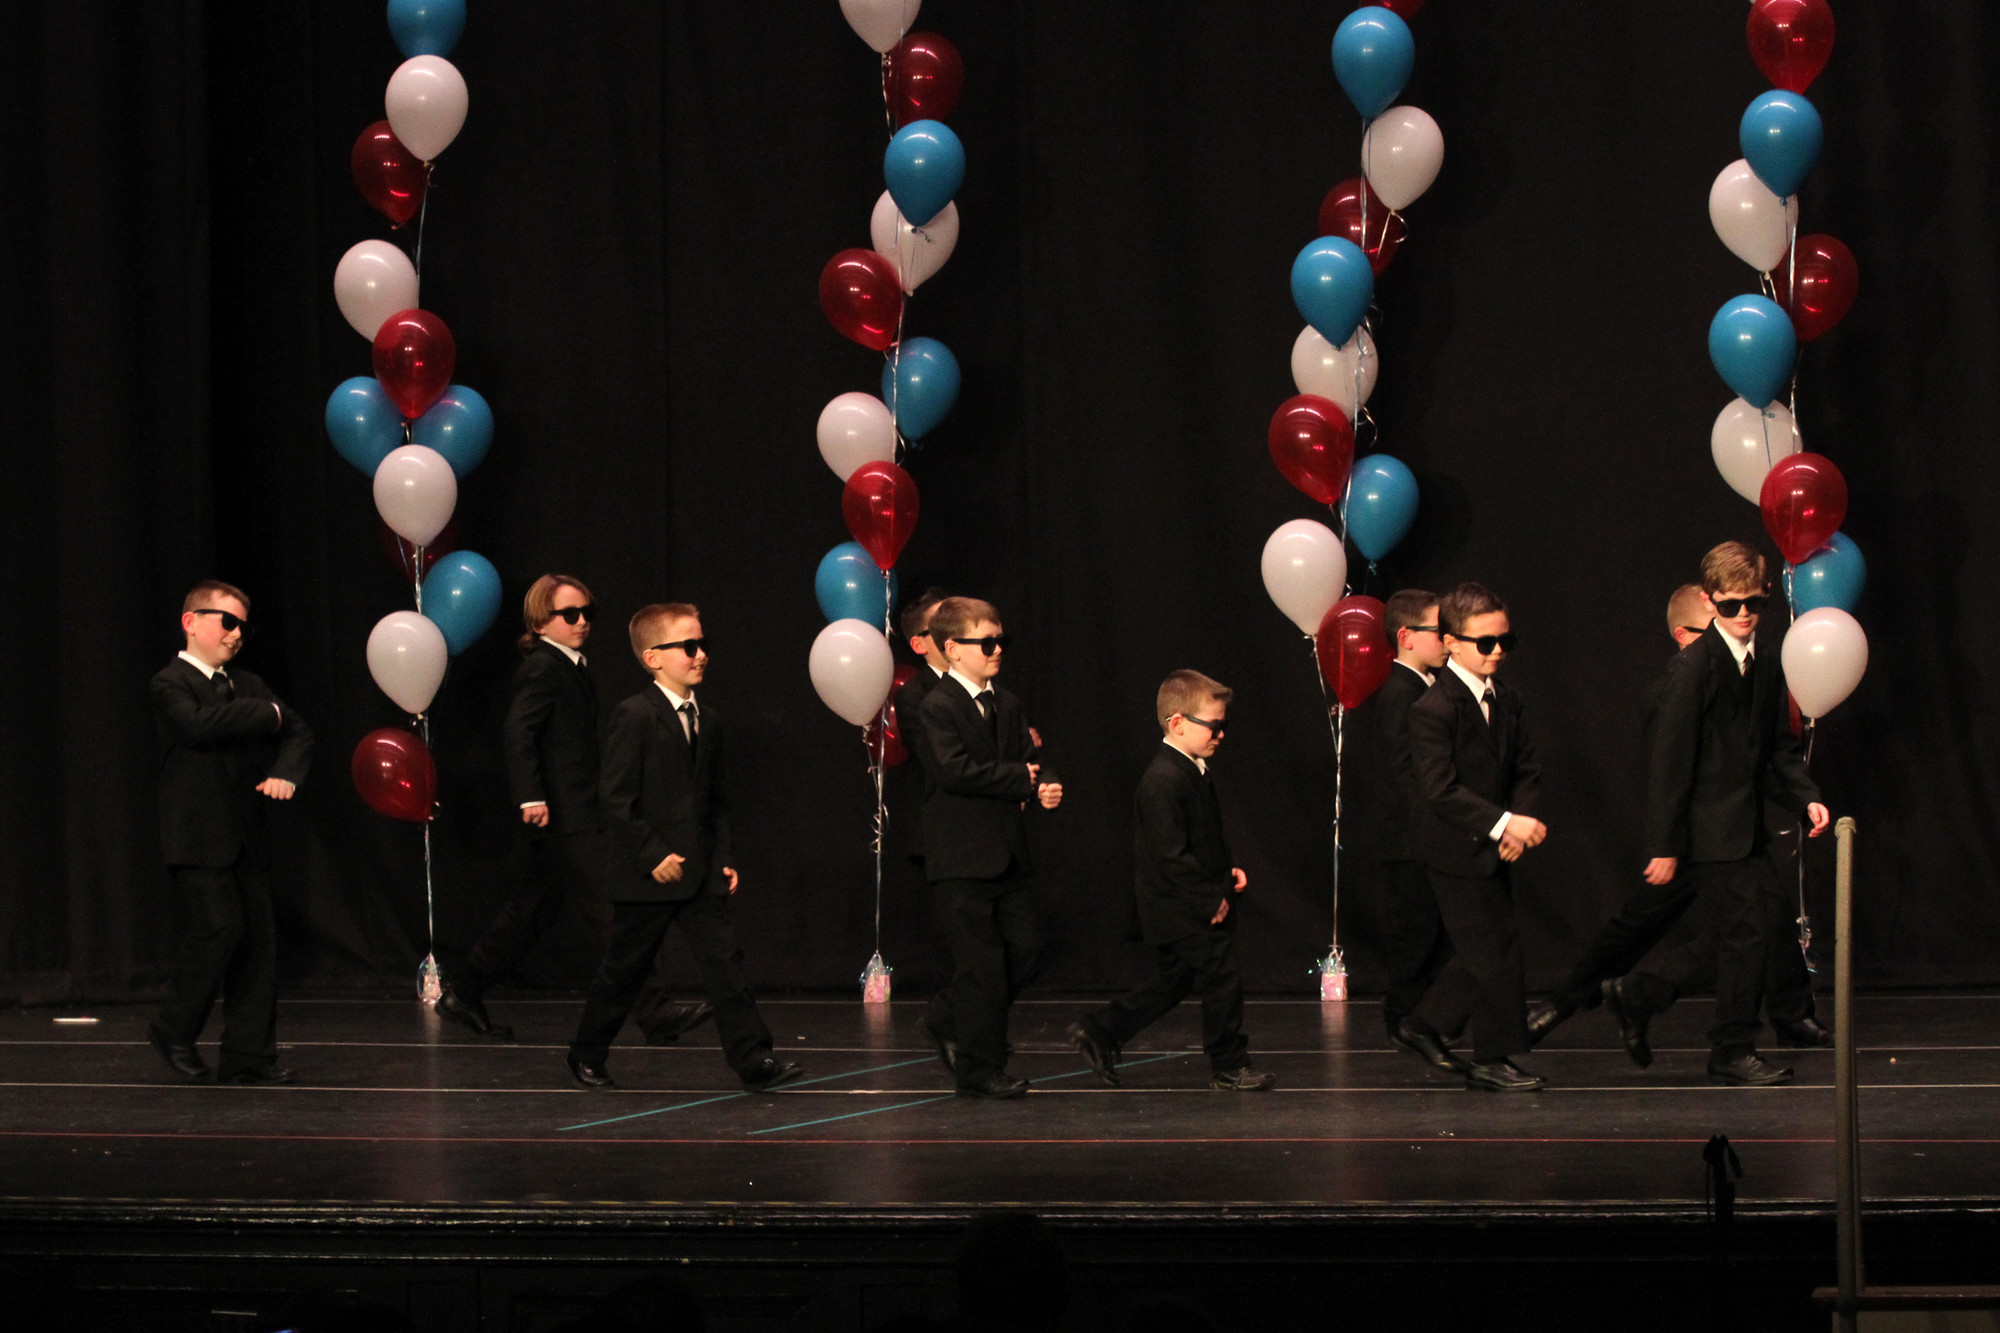 First and second grade boys put on sharp suits and danced to “Men in Black.”